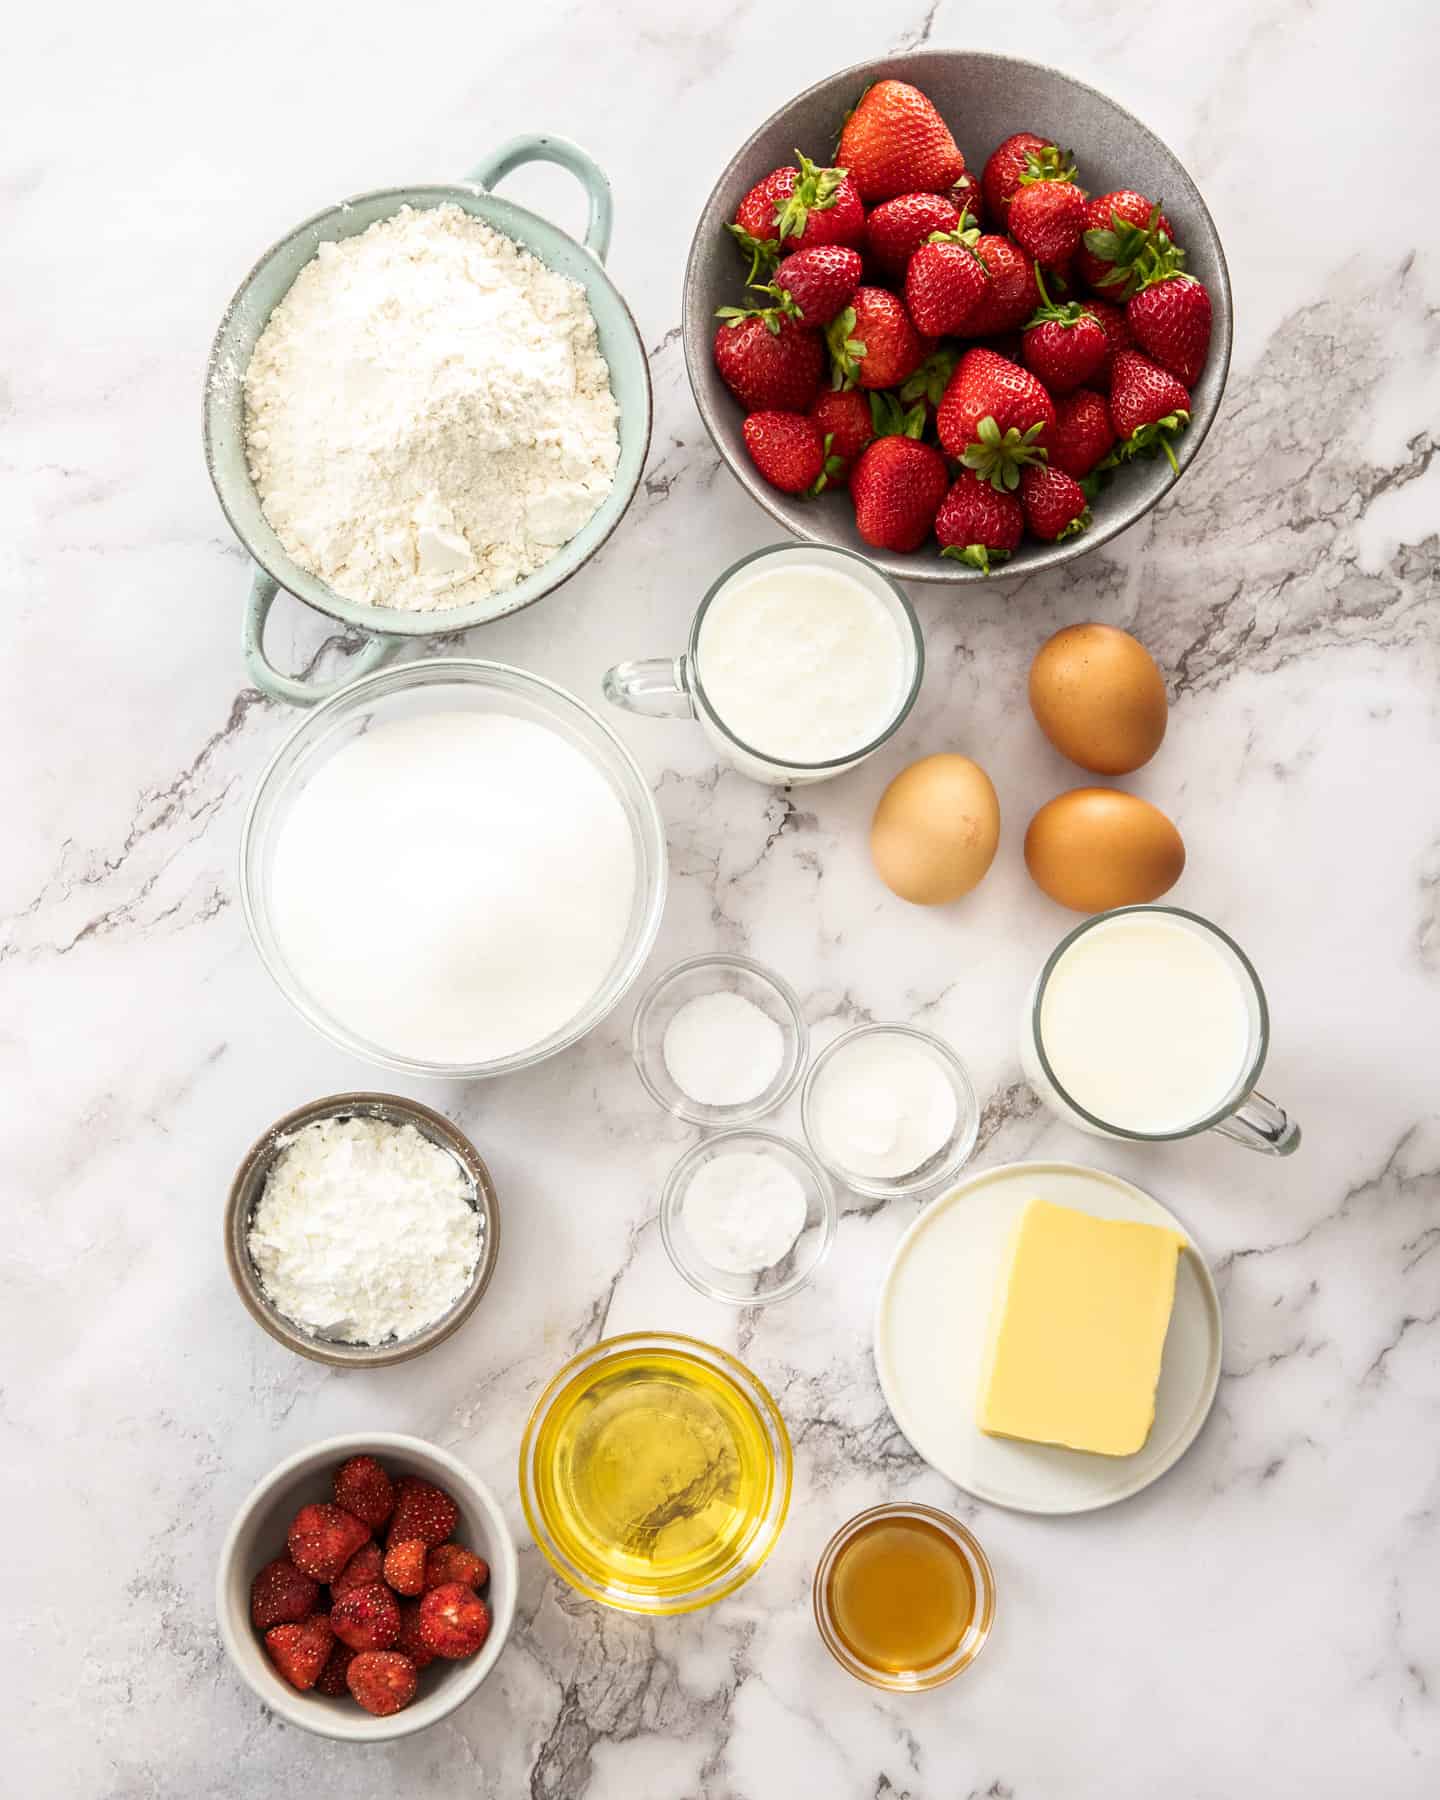 Ingredients for strawberry sheetcake on a marble benchtop.